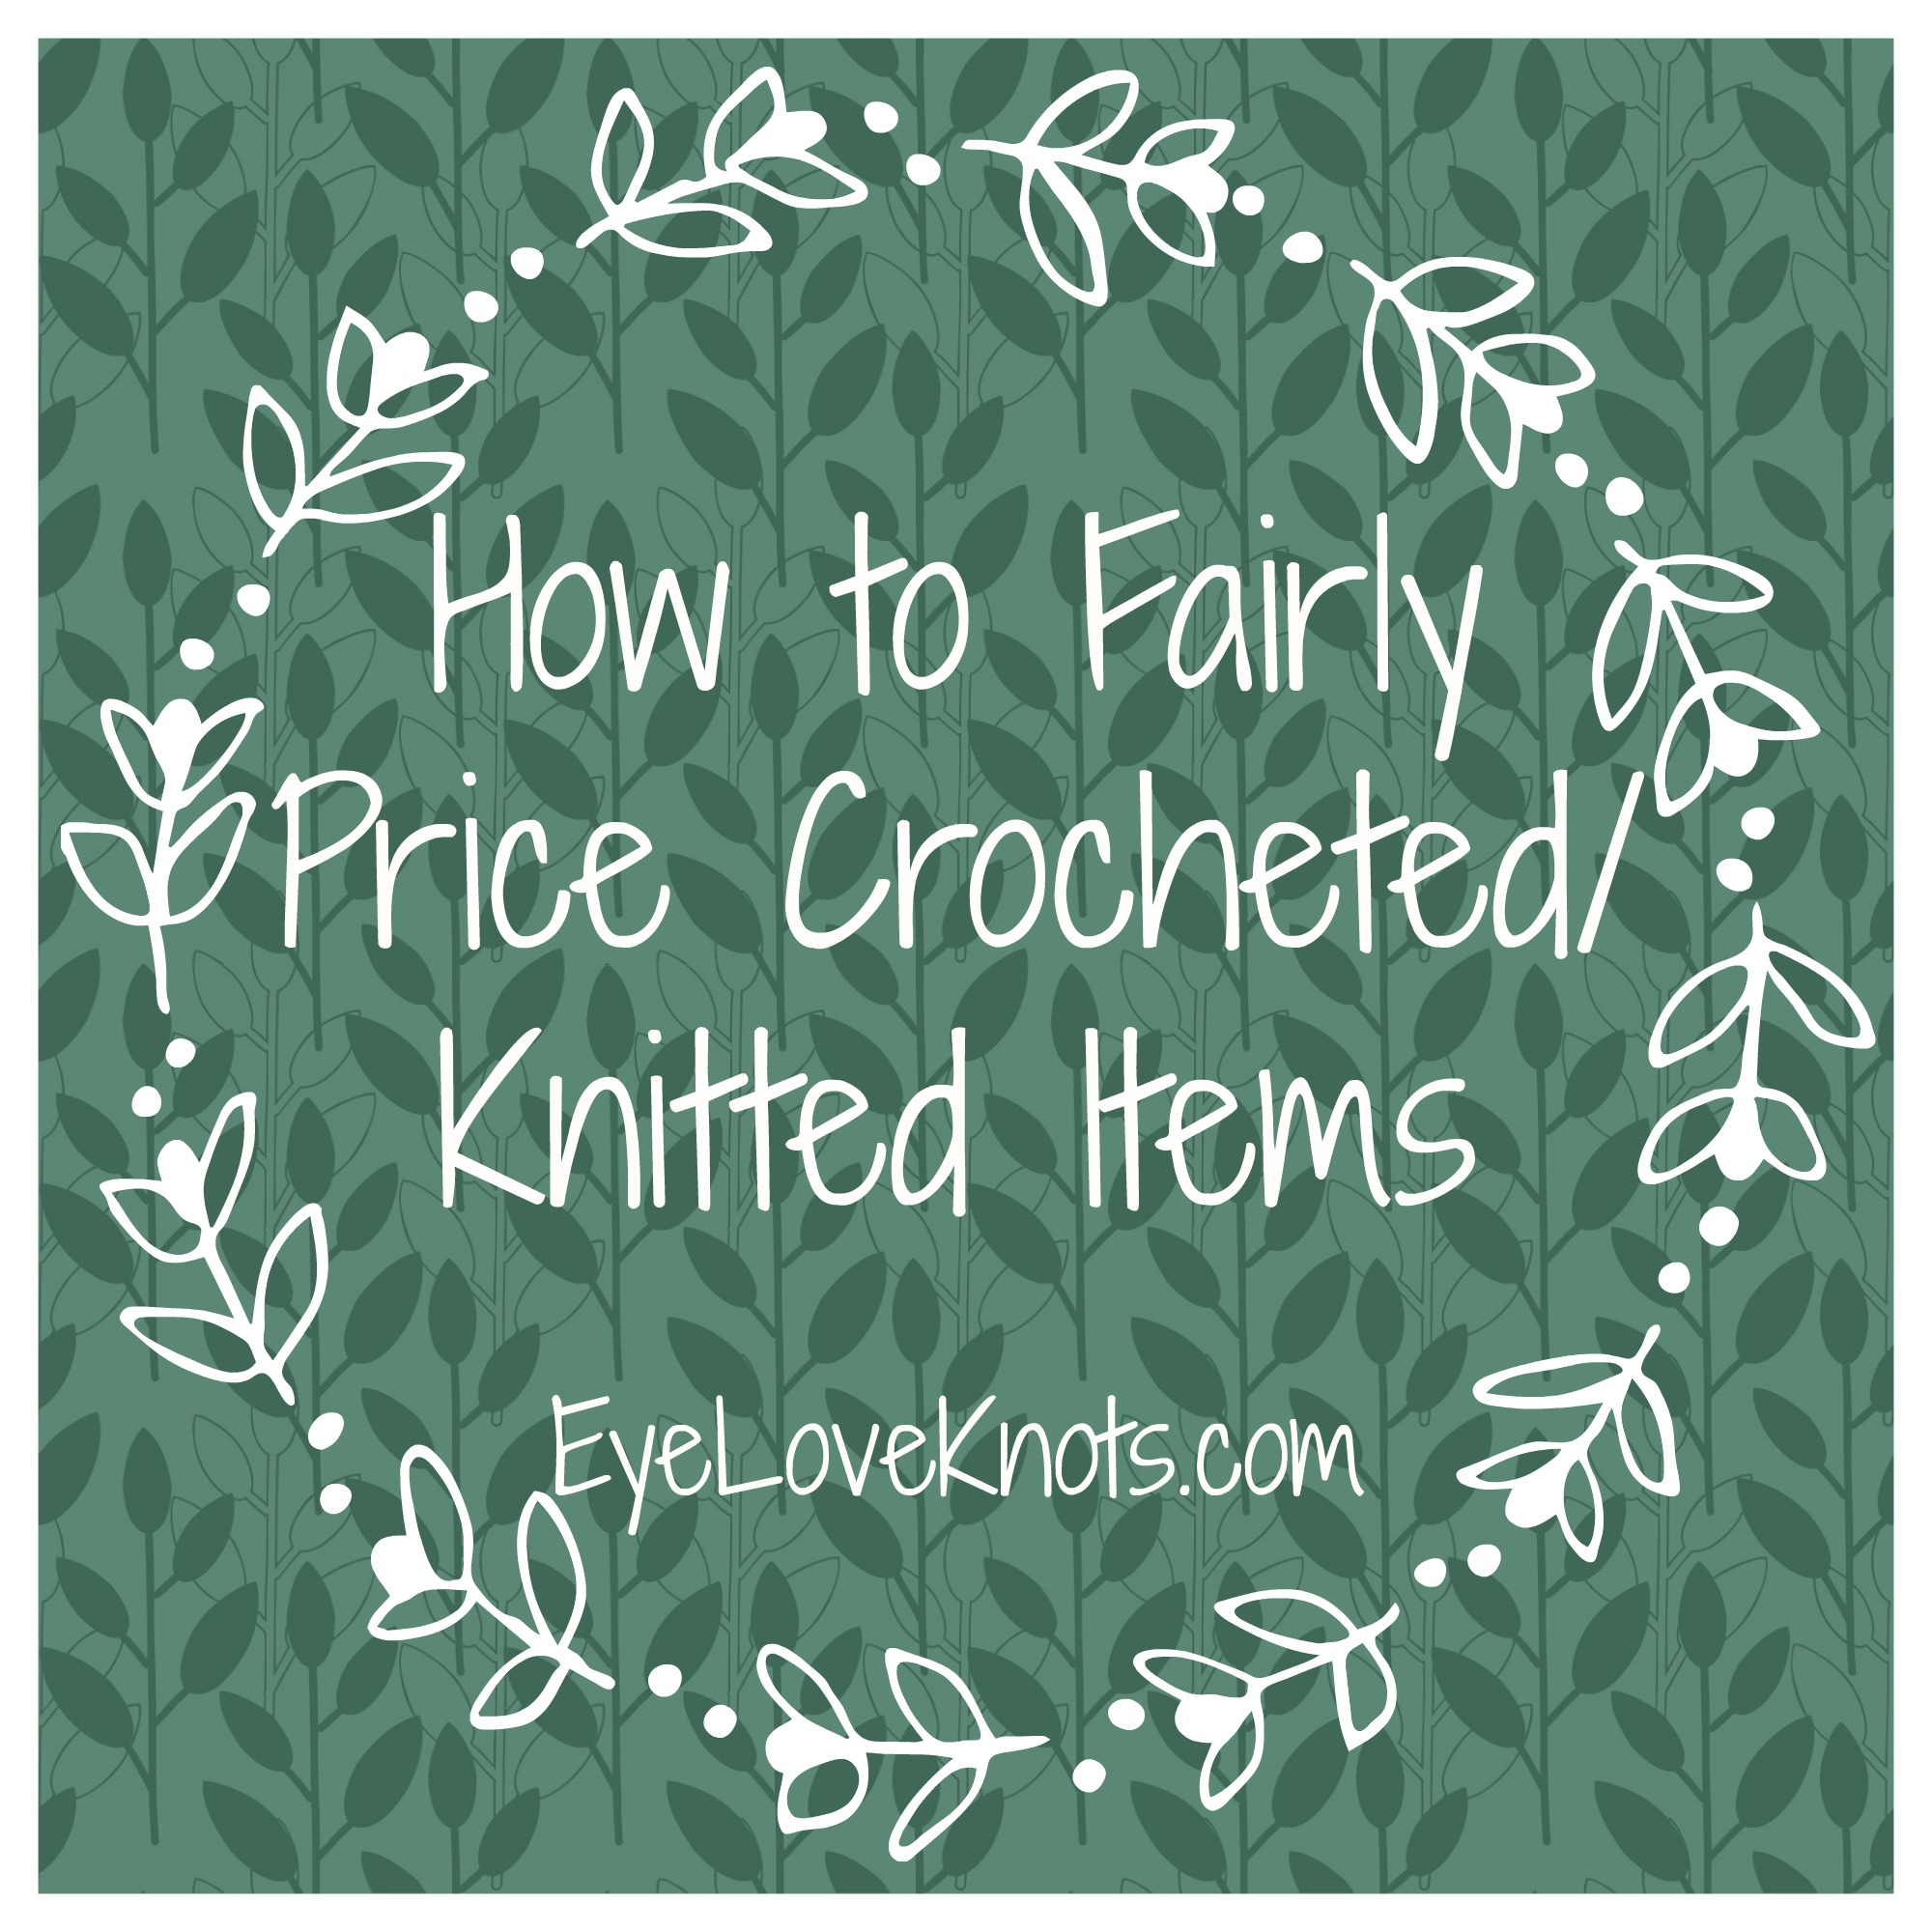 How to Fairly Price Crocheted/Knitted Items - EyeLoveKnots